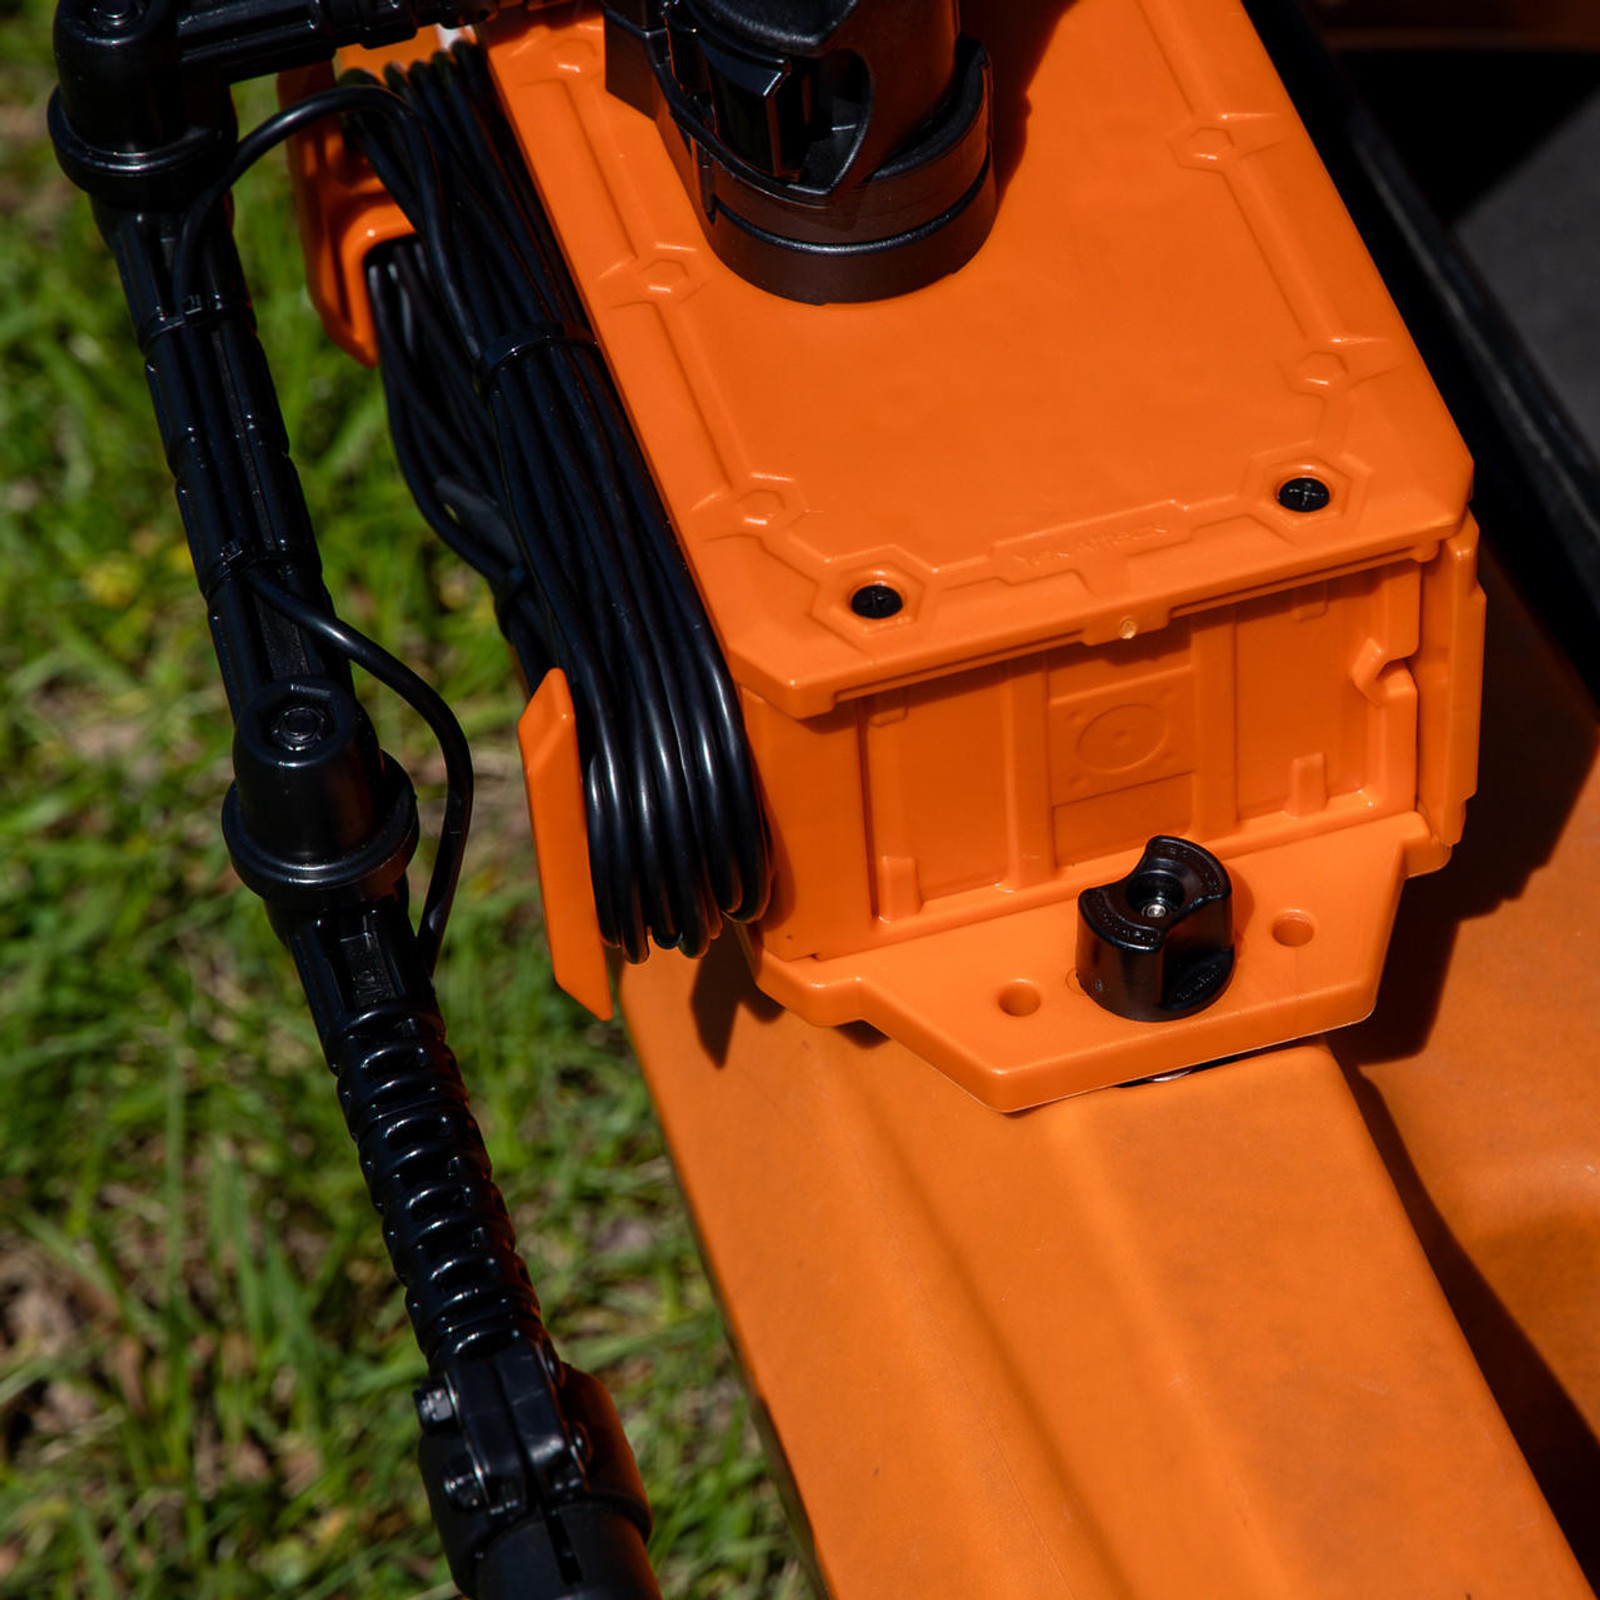  CellBlok Battery Box in Orange and SwitchBlade Transducer Arm Combo 